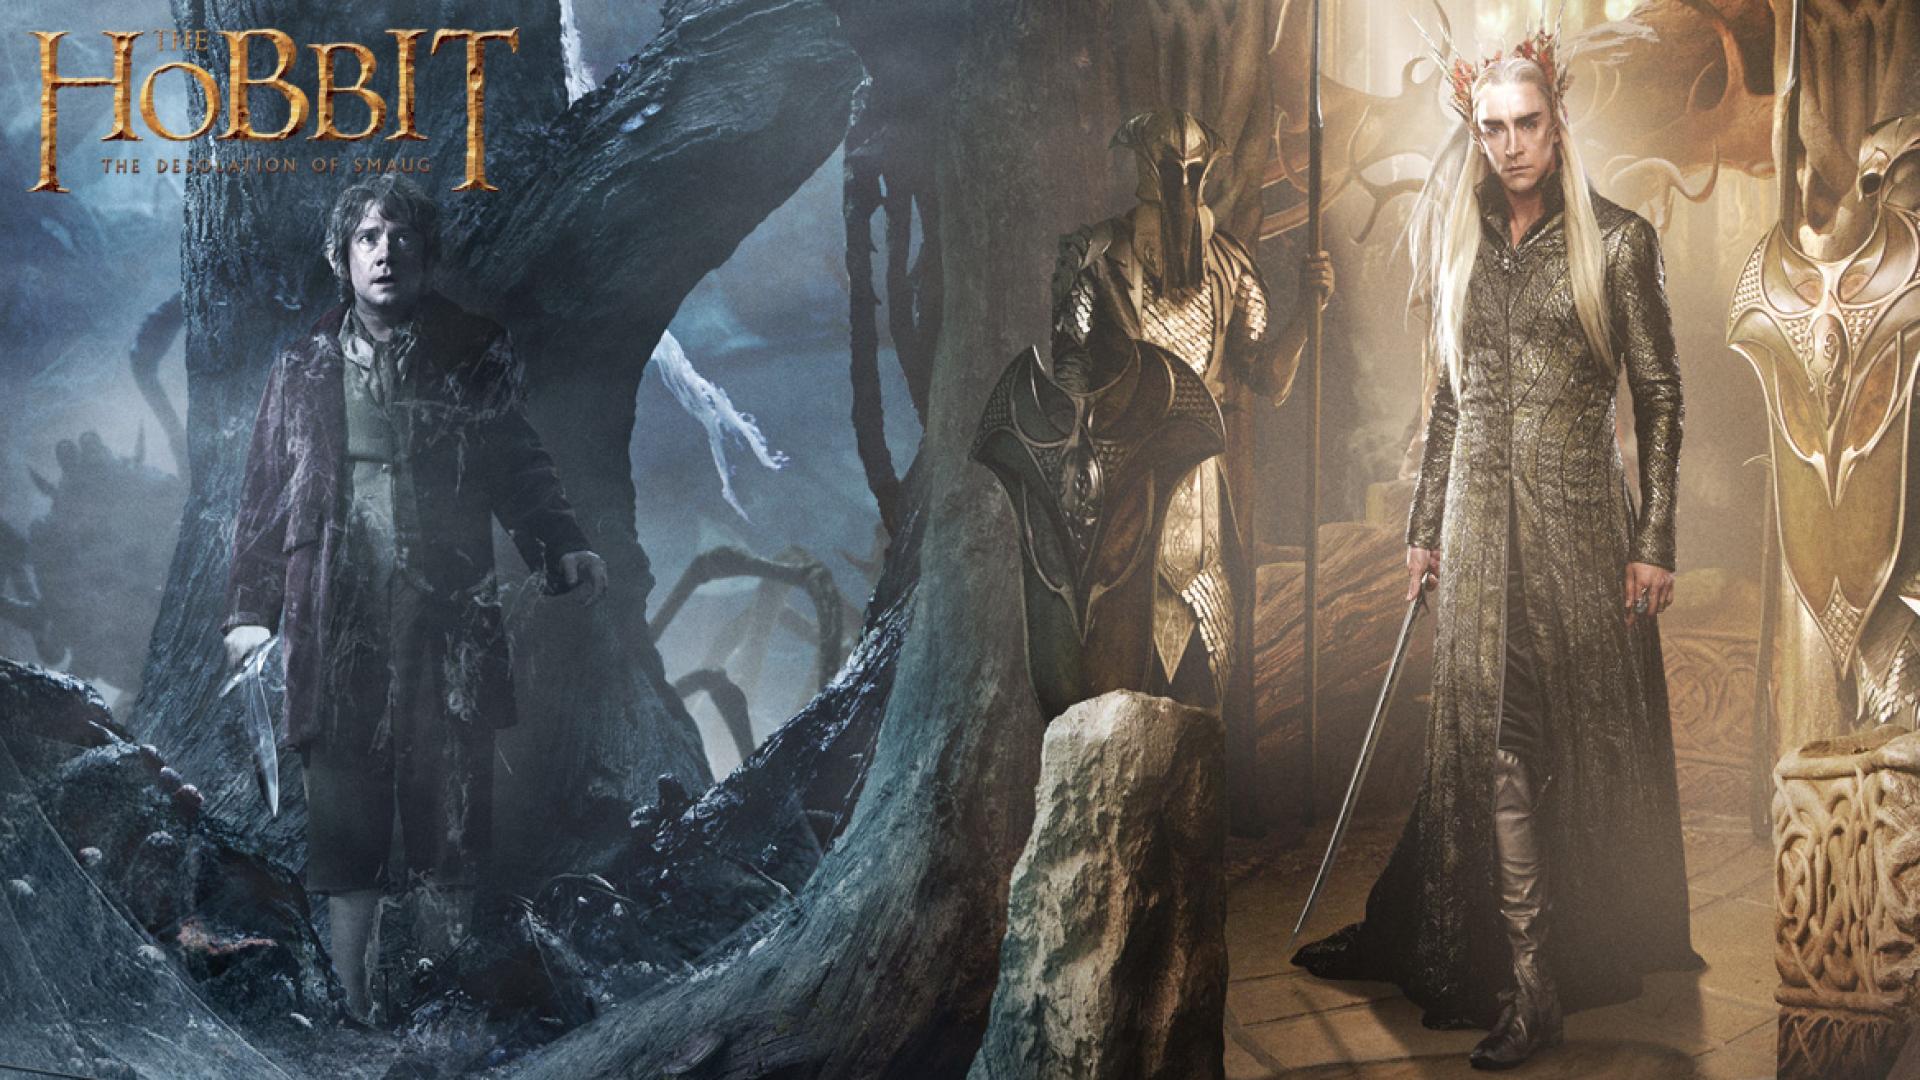 The Hobbit: The Desolation of Smaug for mac download free